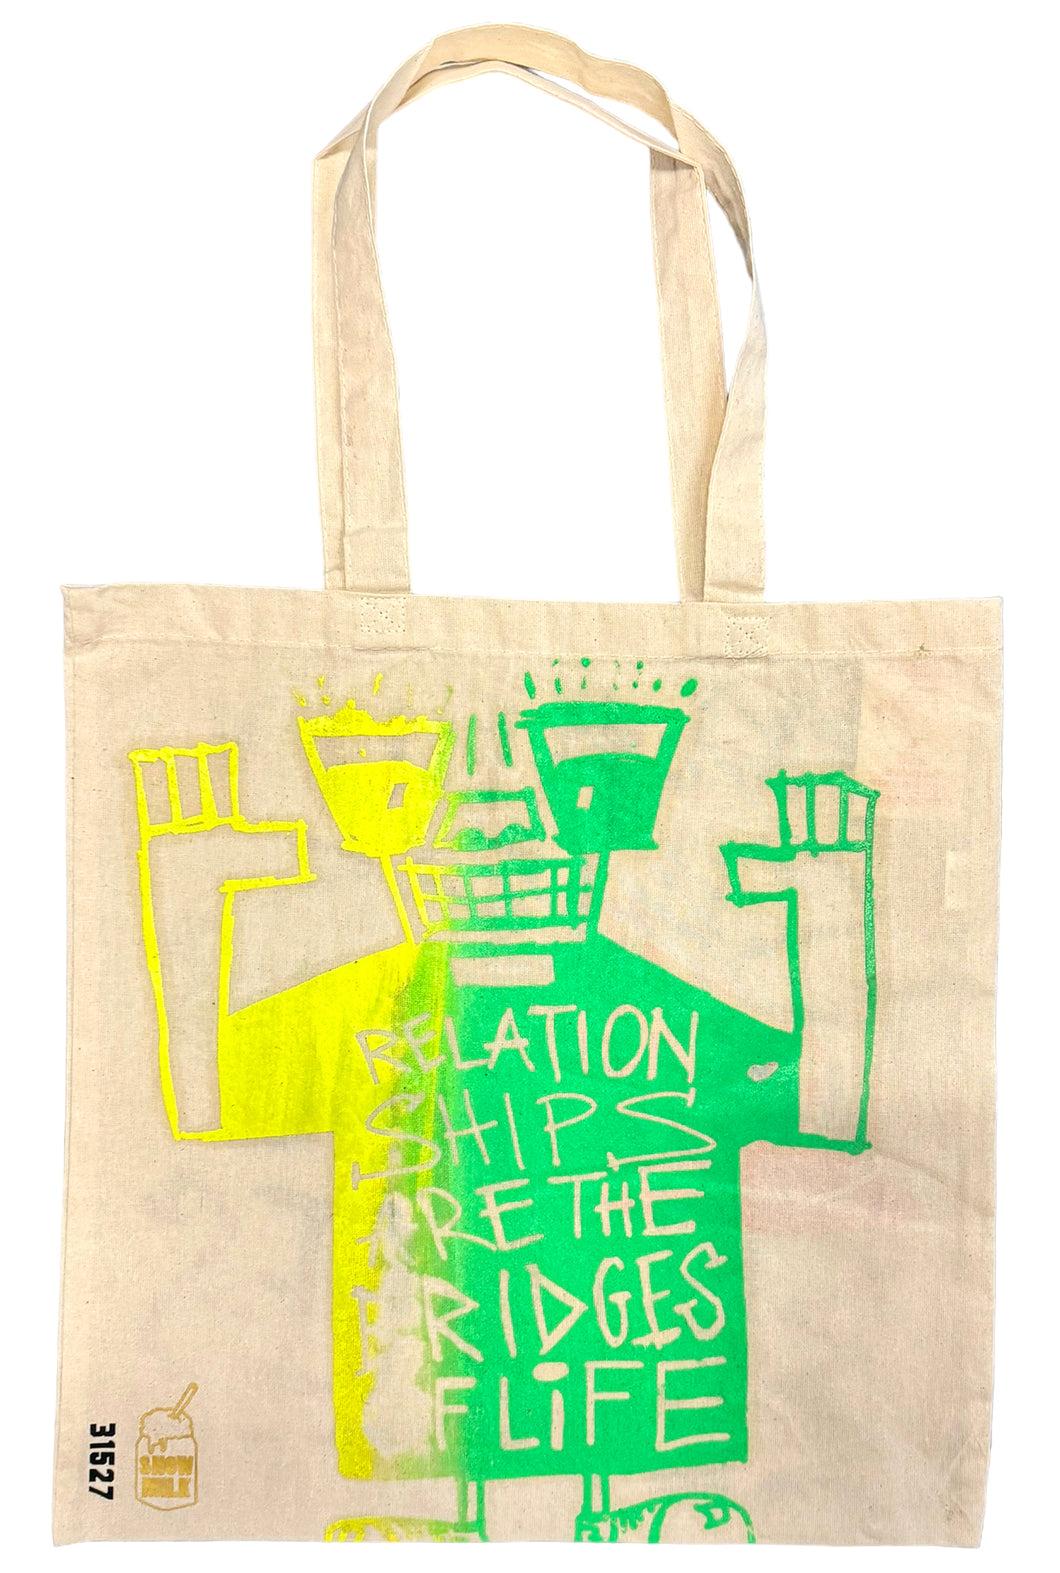 Relationships Are The Bridges Of Life Tote Bag (Size Large)